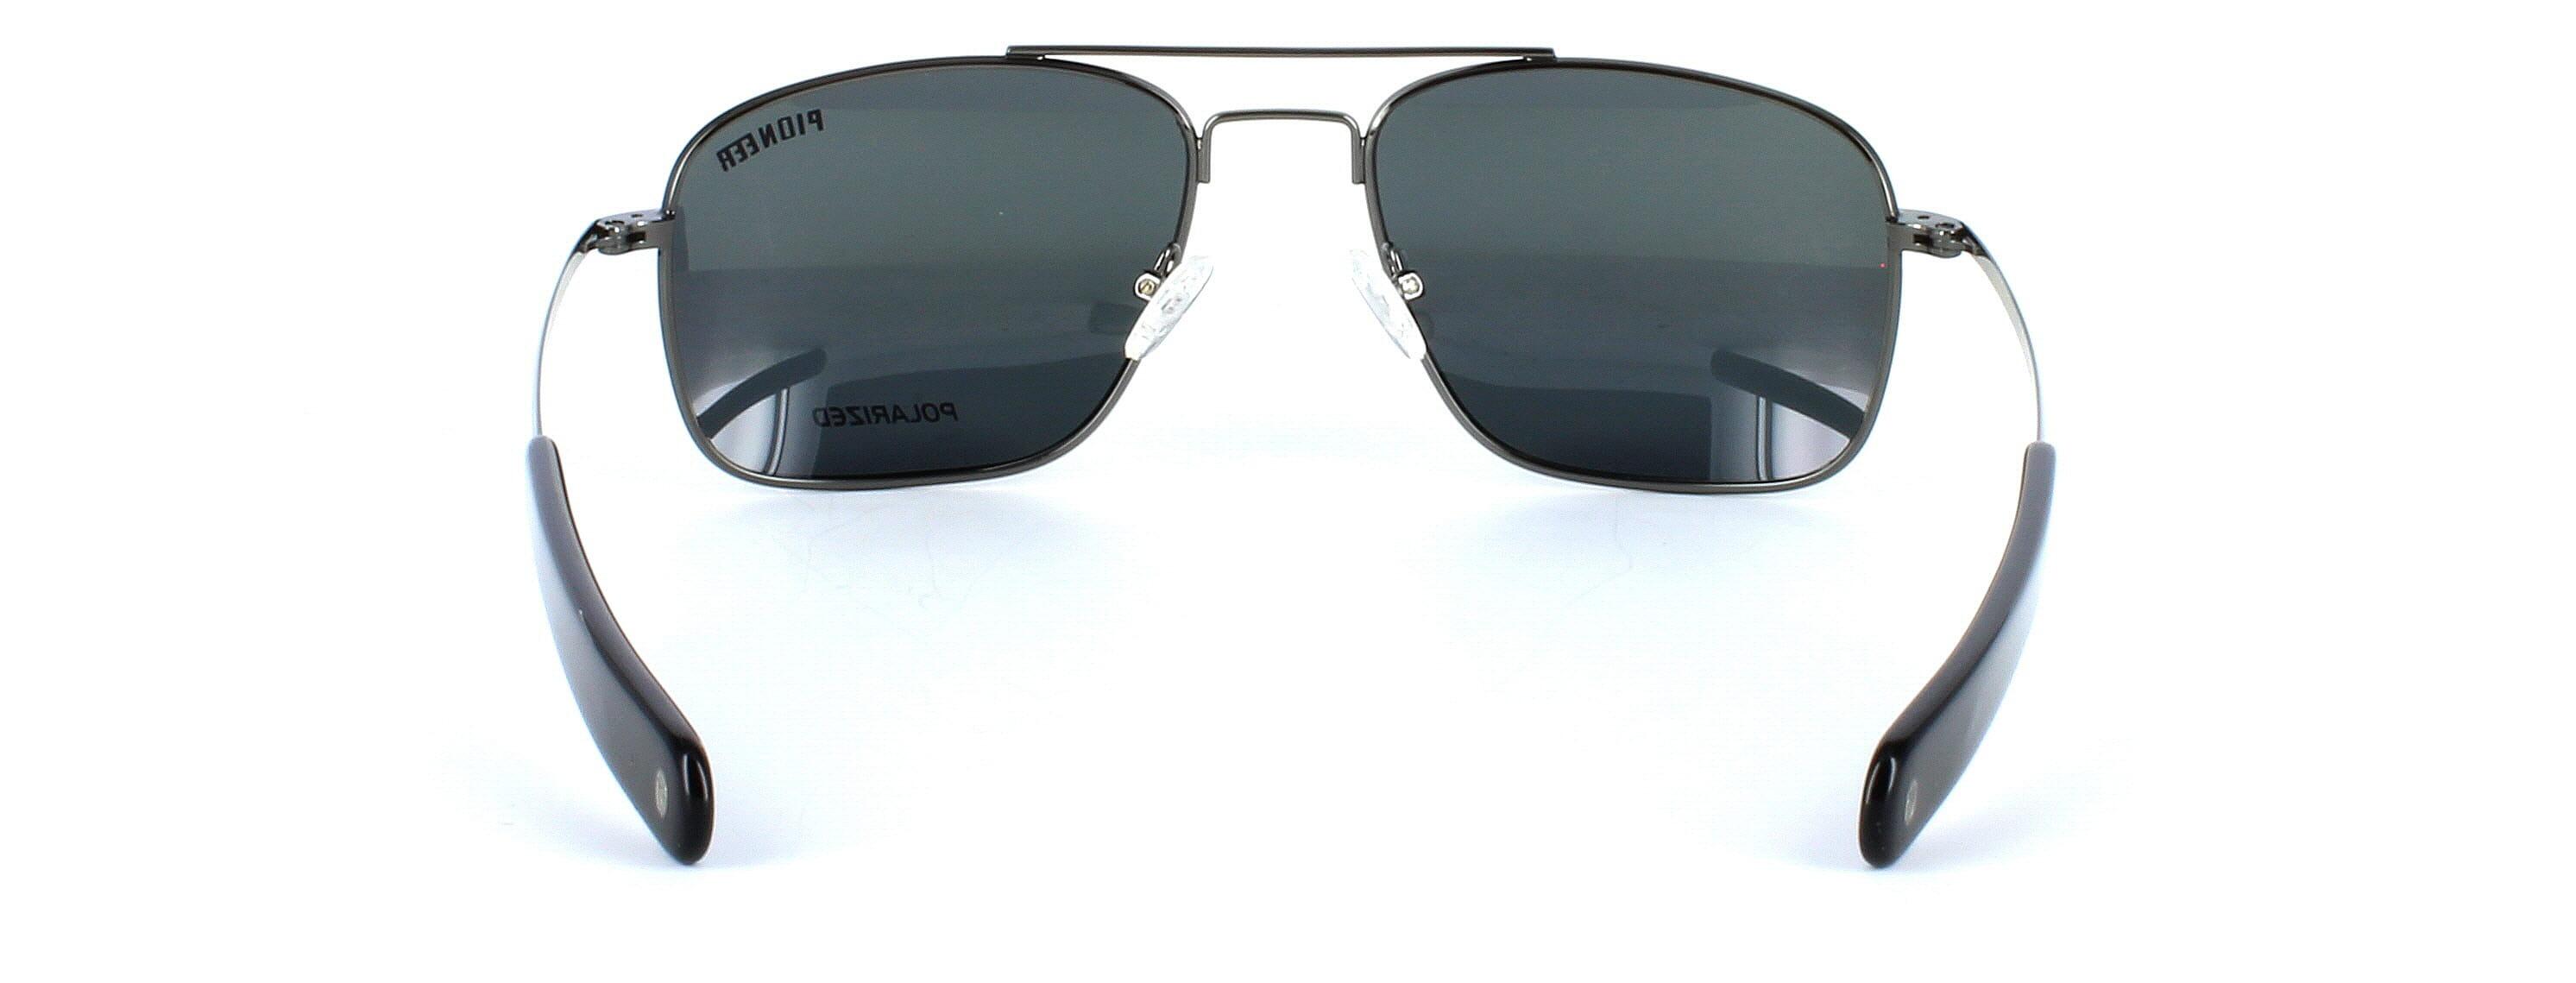 Tommaso - Gent's aviator style prescription sunglasses in gunmetal - choose green, brown or grey tints inc in the price - image view 2